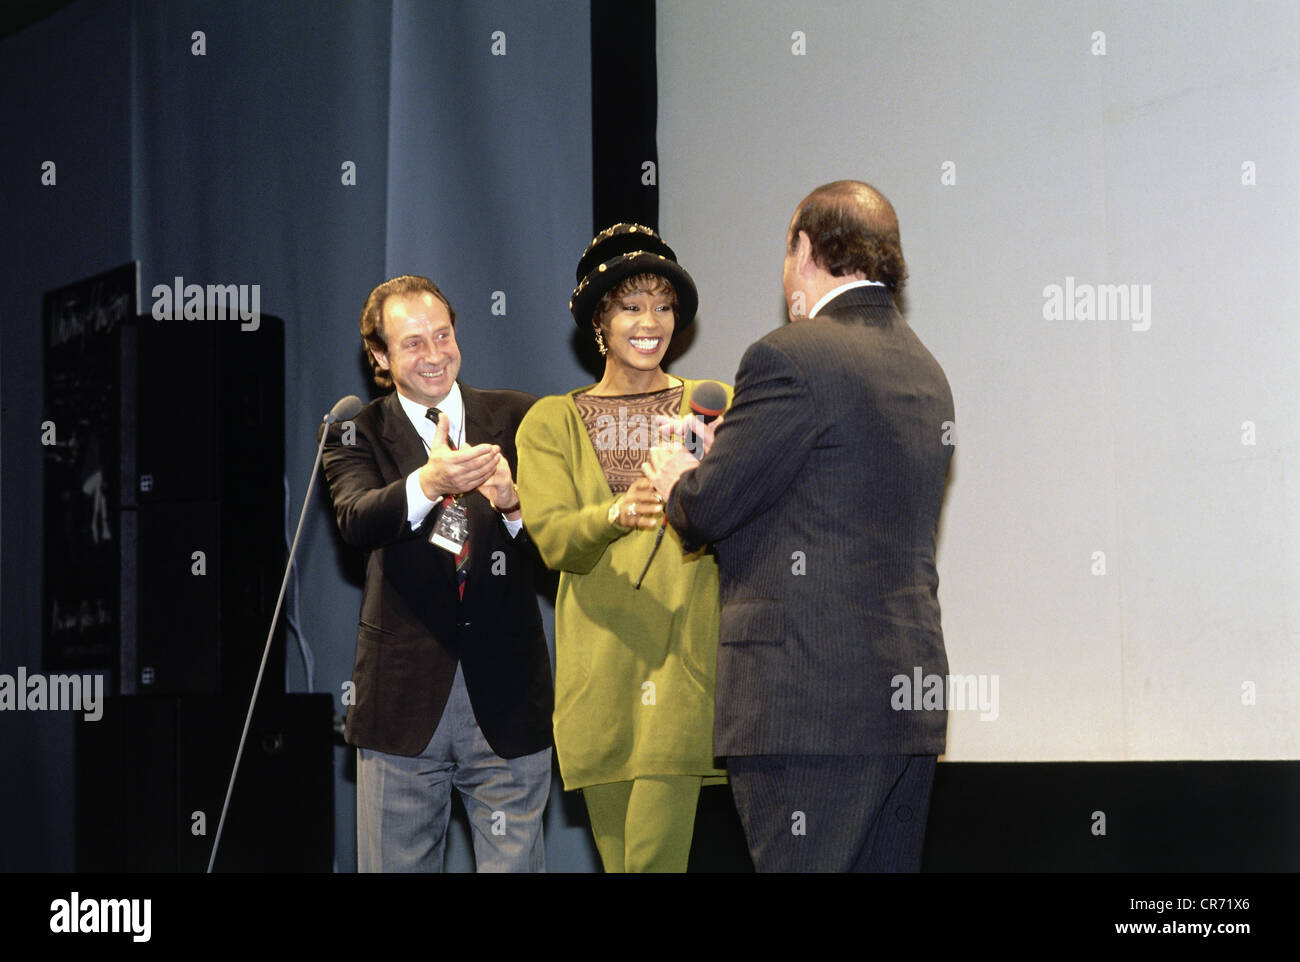 Houston, Whitney, 9.8.1963 - 11.2.2012, US singer, actress, half length, with Egmont 'Monti' Lueftner und Clive Davis, during the presentation of her 3rd record in Munich, Germany, Park Hilton Hotel, 30.10.1990, Stock Photo